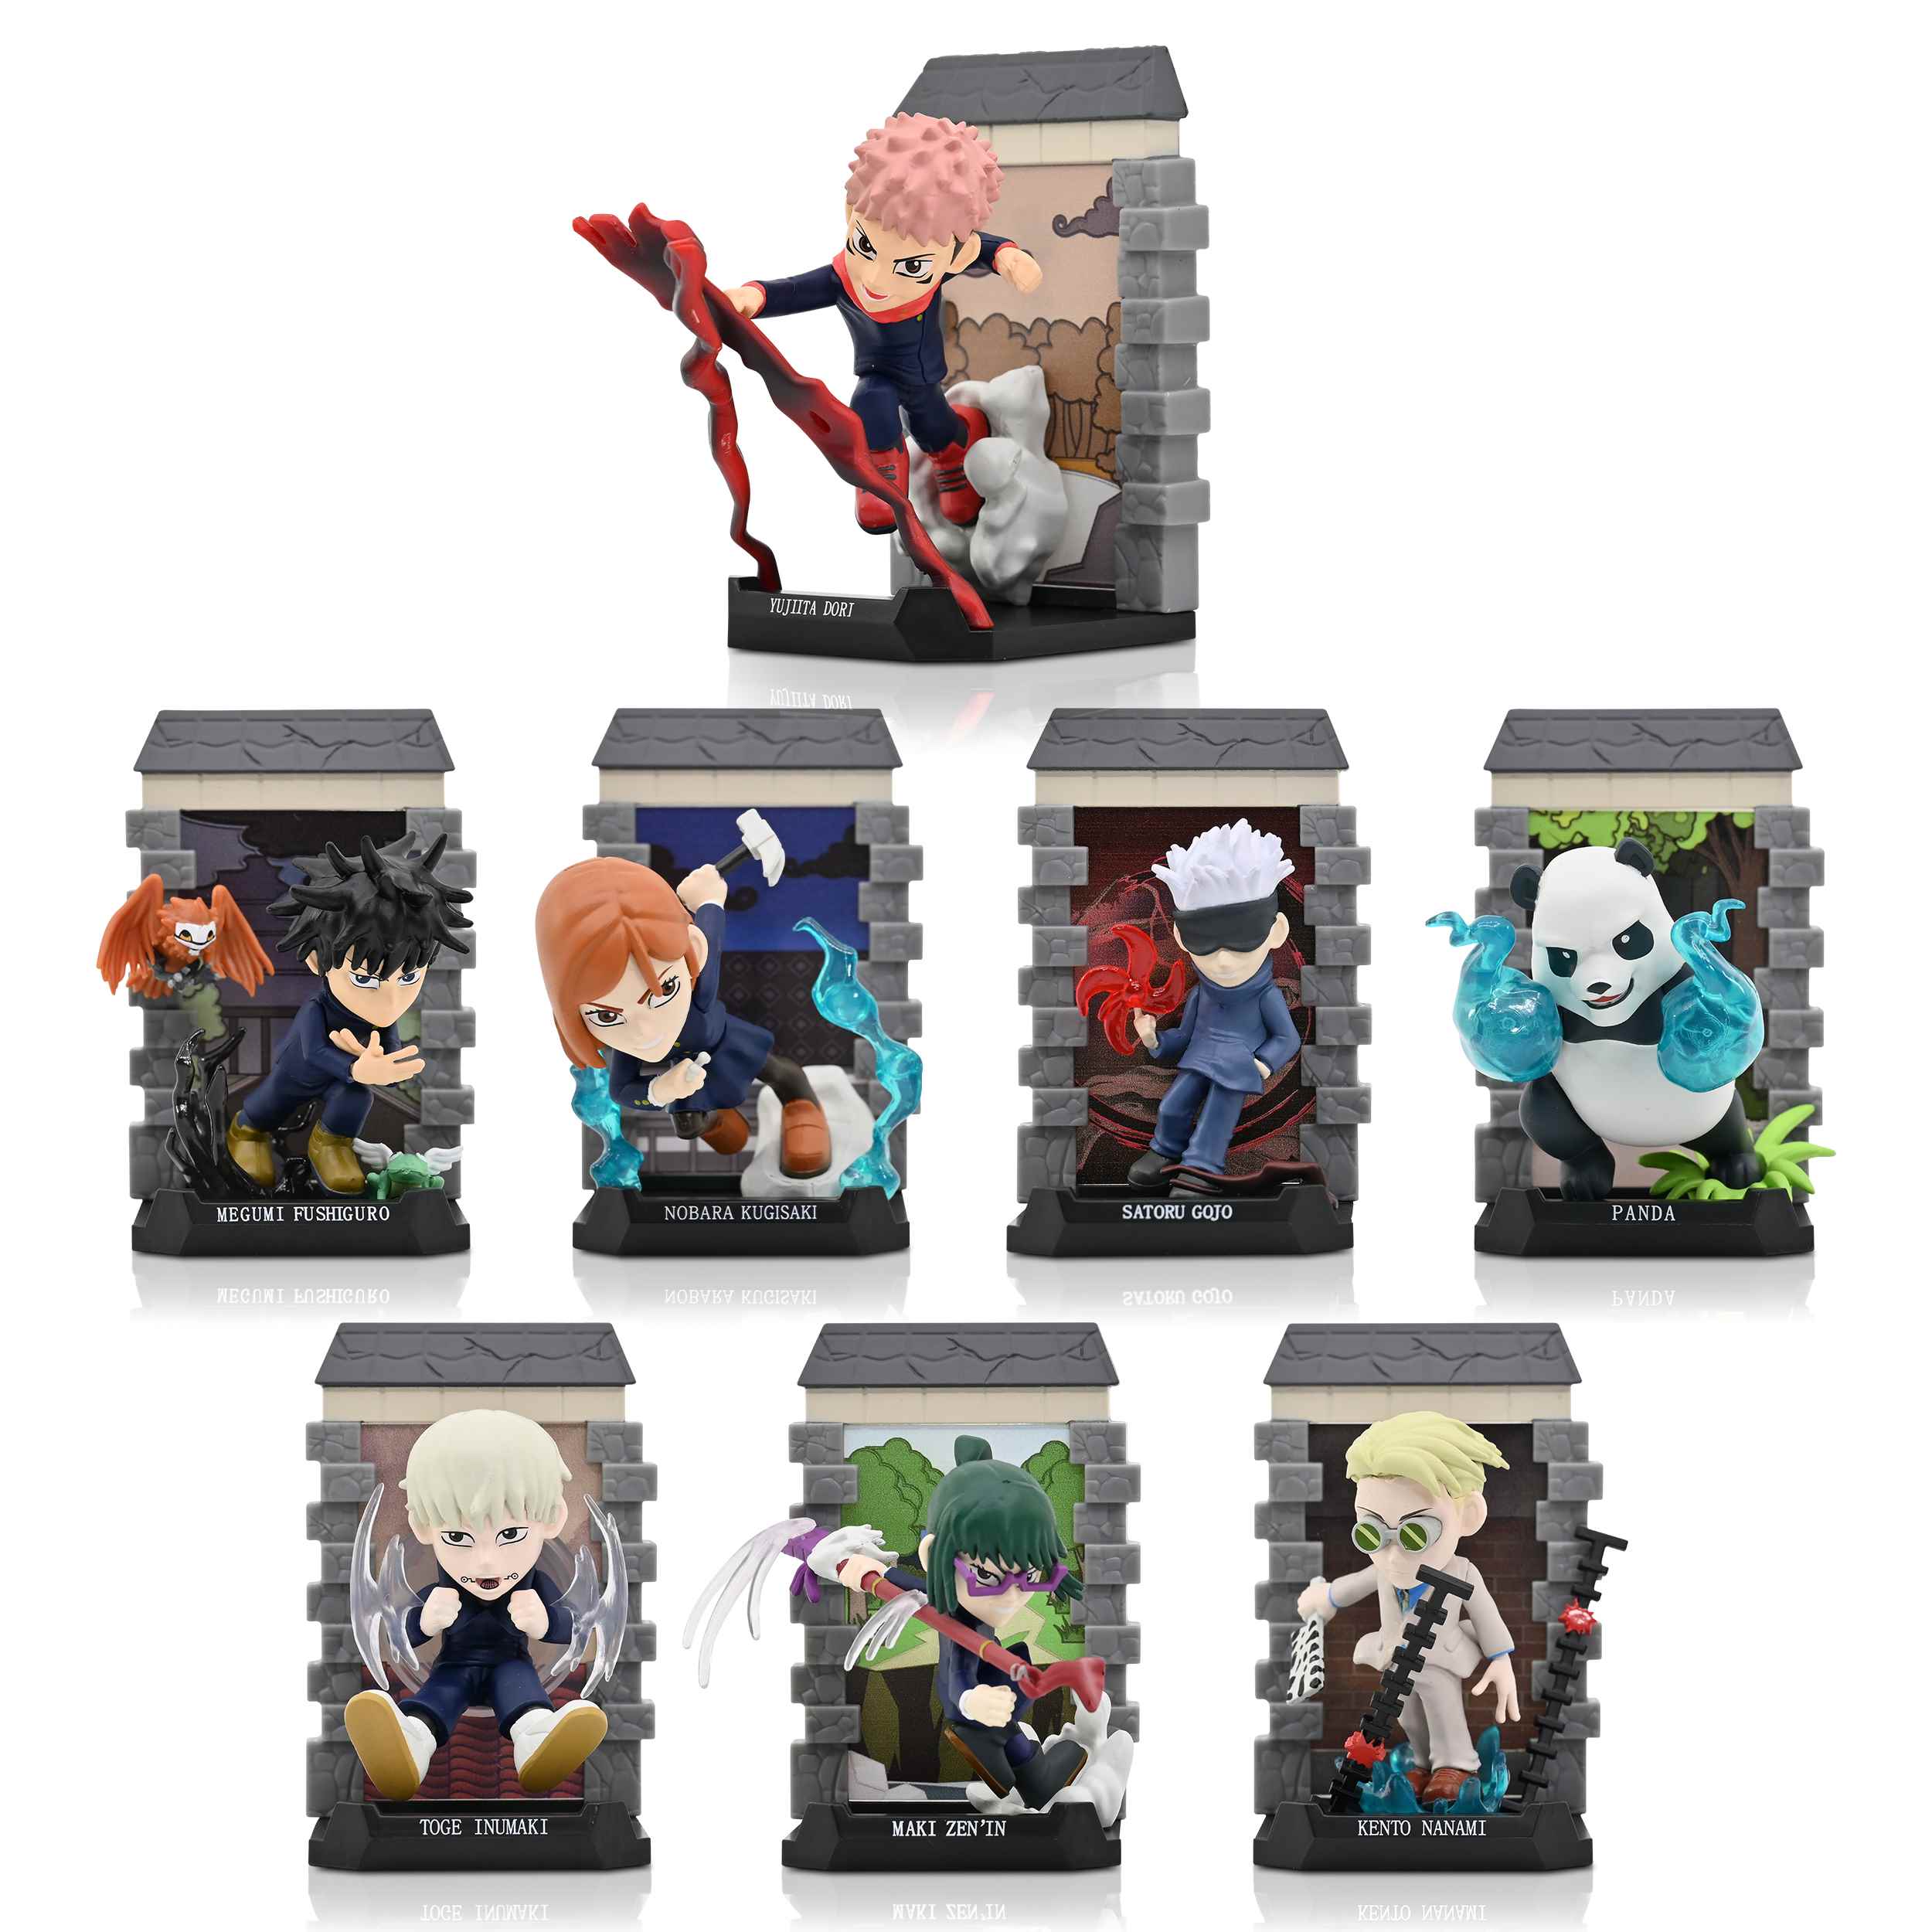 Yume Disney 100 Series Mystery Capsule Blind Box with Surprise Characters Figurines Toys 2 Pack